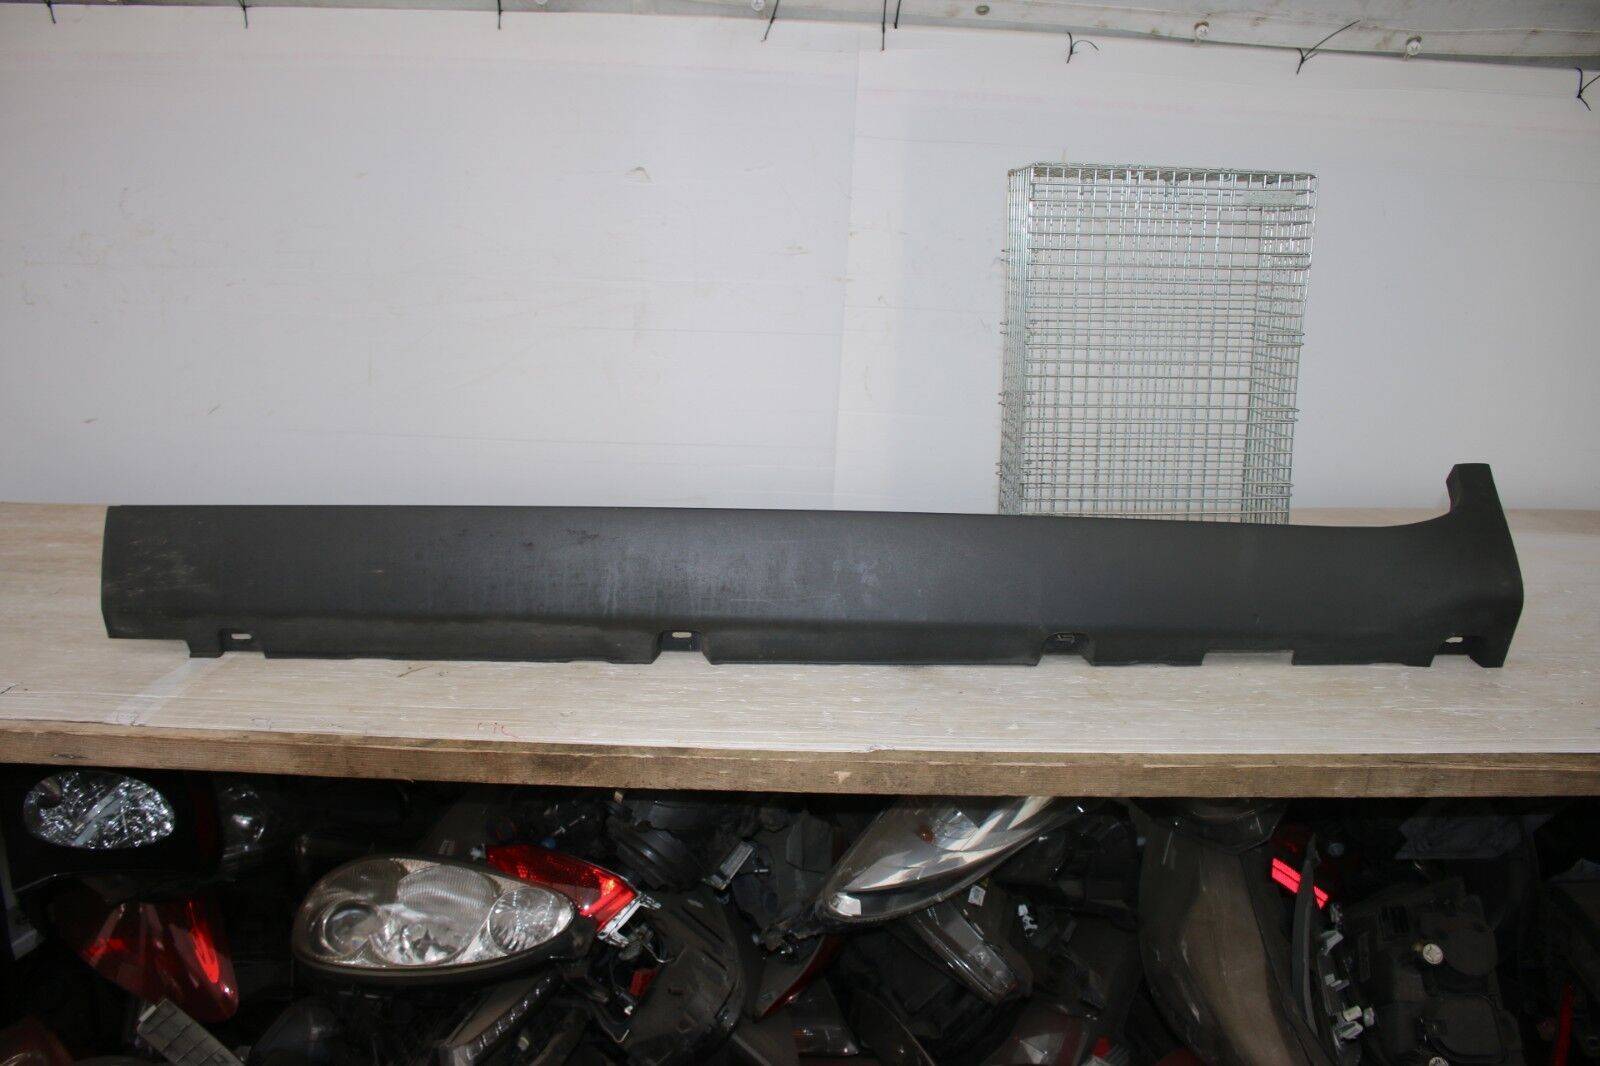 FORD KUGA LEFT SIDE SILL SKIRT COVER 2008 TO 2012 175367545084